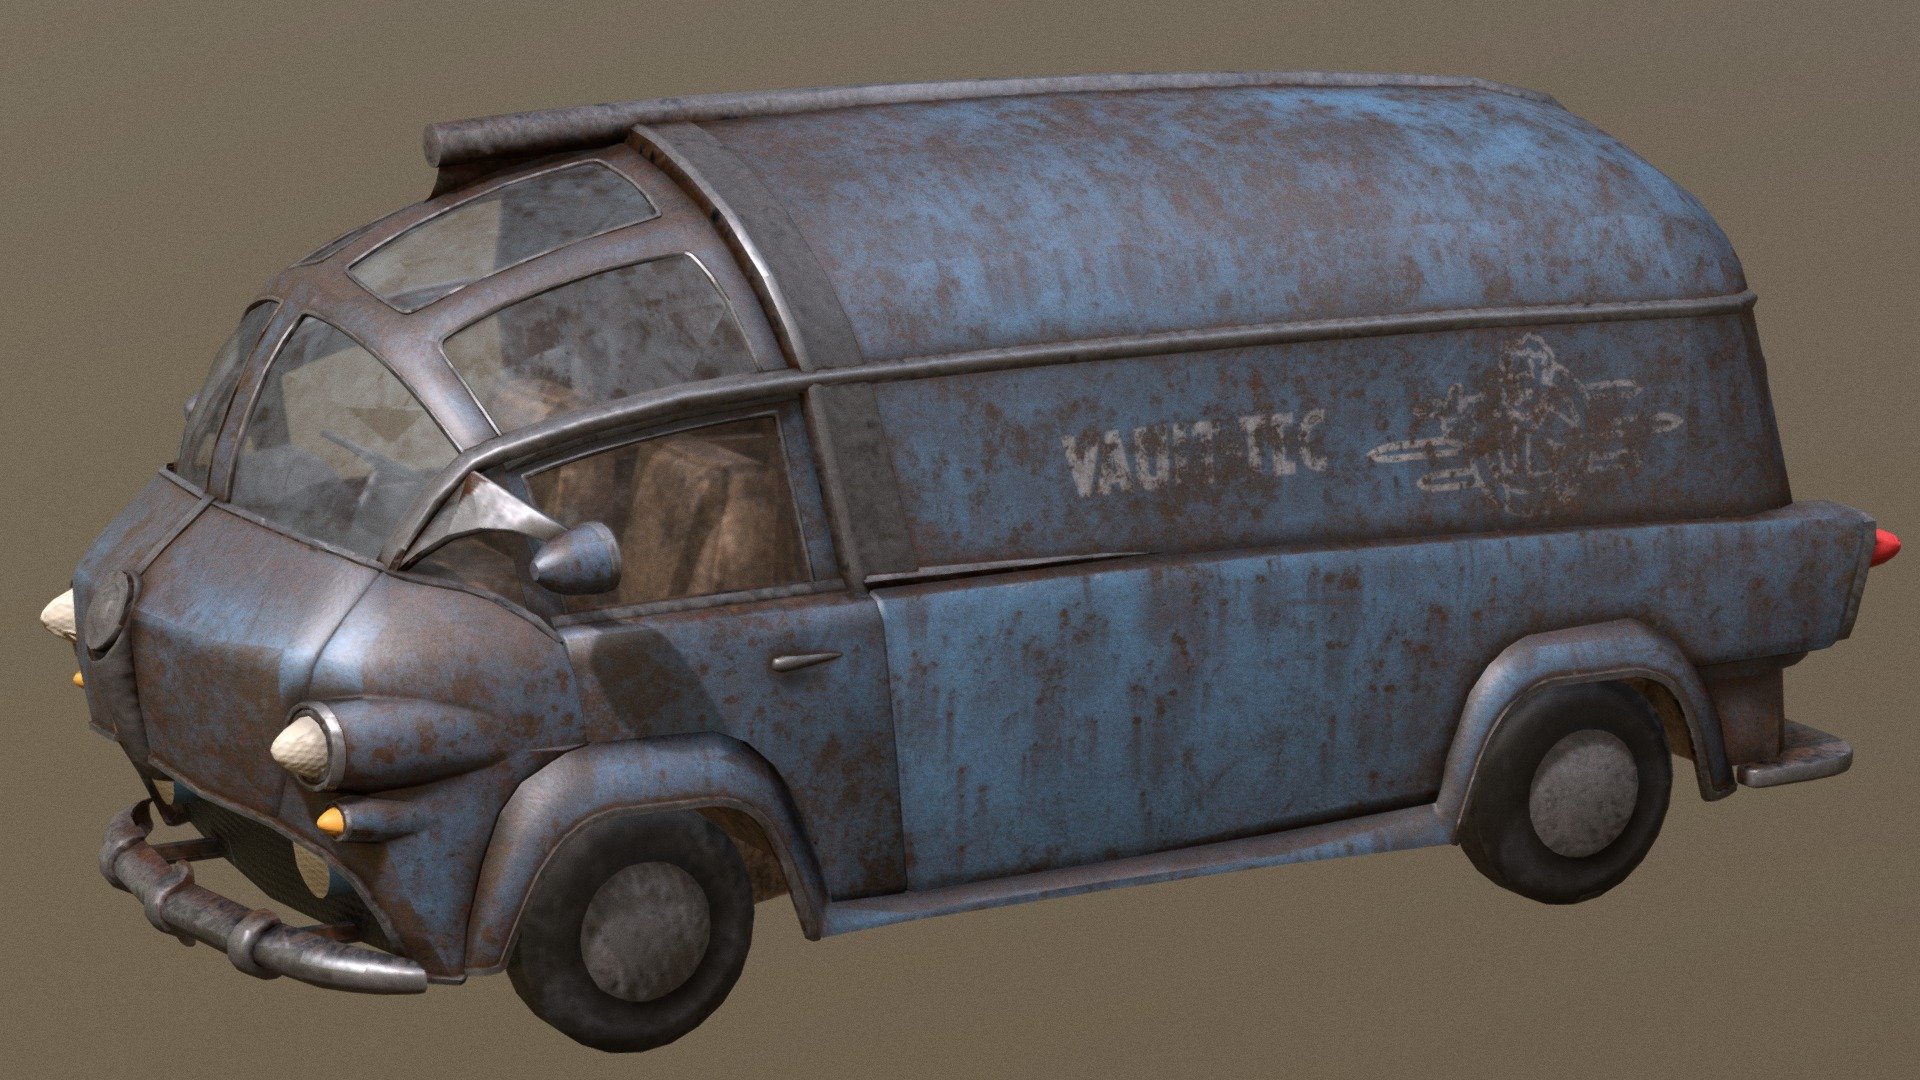 VAULT-TEC  car rust - after
Game ready model for unreal, unity engine. For scenes, videos, games.
4k PBR  textures in substance painter. Albedo, Metalic + rougness, Normal map. 
gizmos ready. You need somting ? PM me =)
ready for 3D printing - VAULT-TEC  car rust - after - Buy Royalty Free 3D model by Thomas Binder (@bindertom61) 3d model